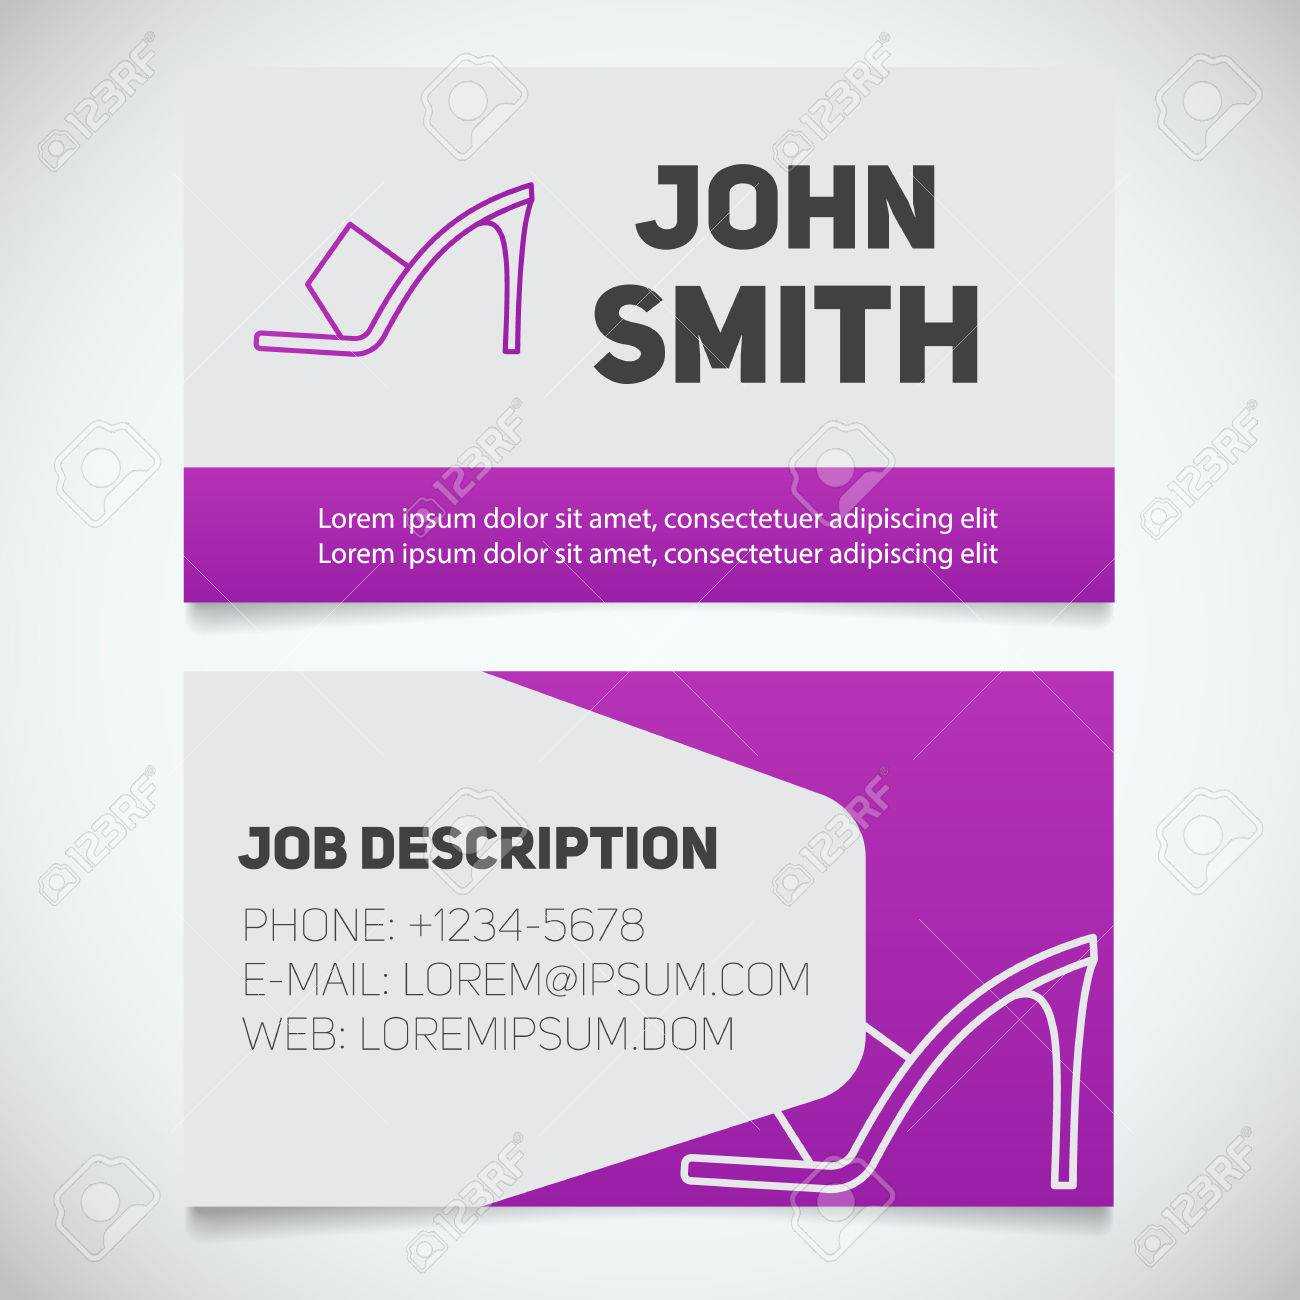 Business Card Print Template With High Heel Shoe Logo. Manager For High Heel Template For Cards